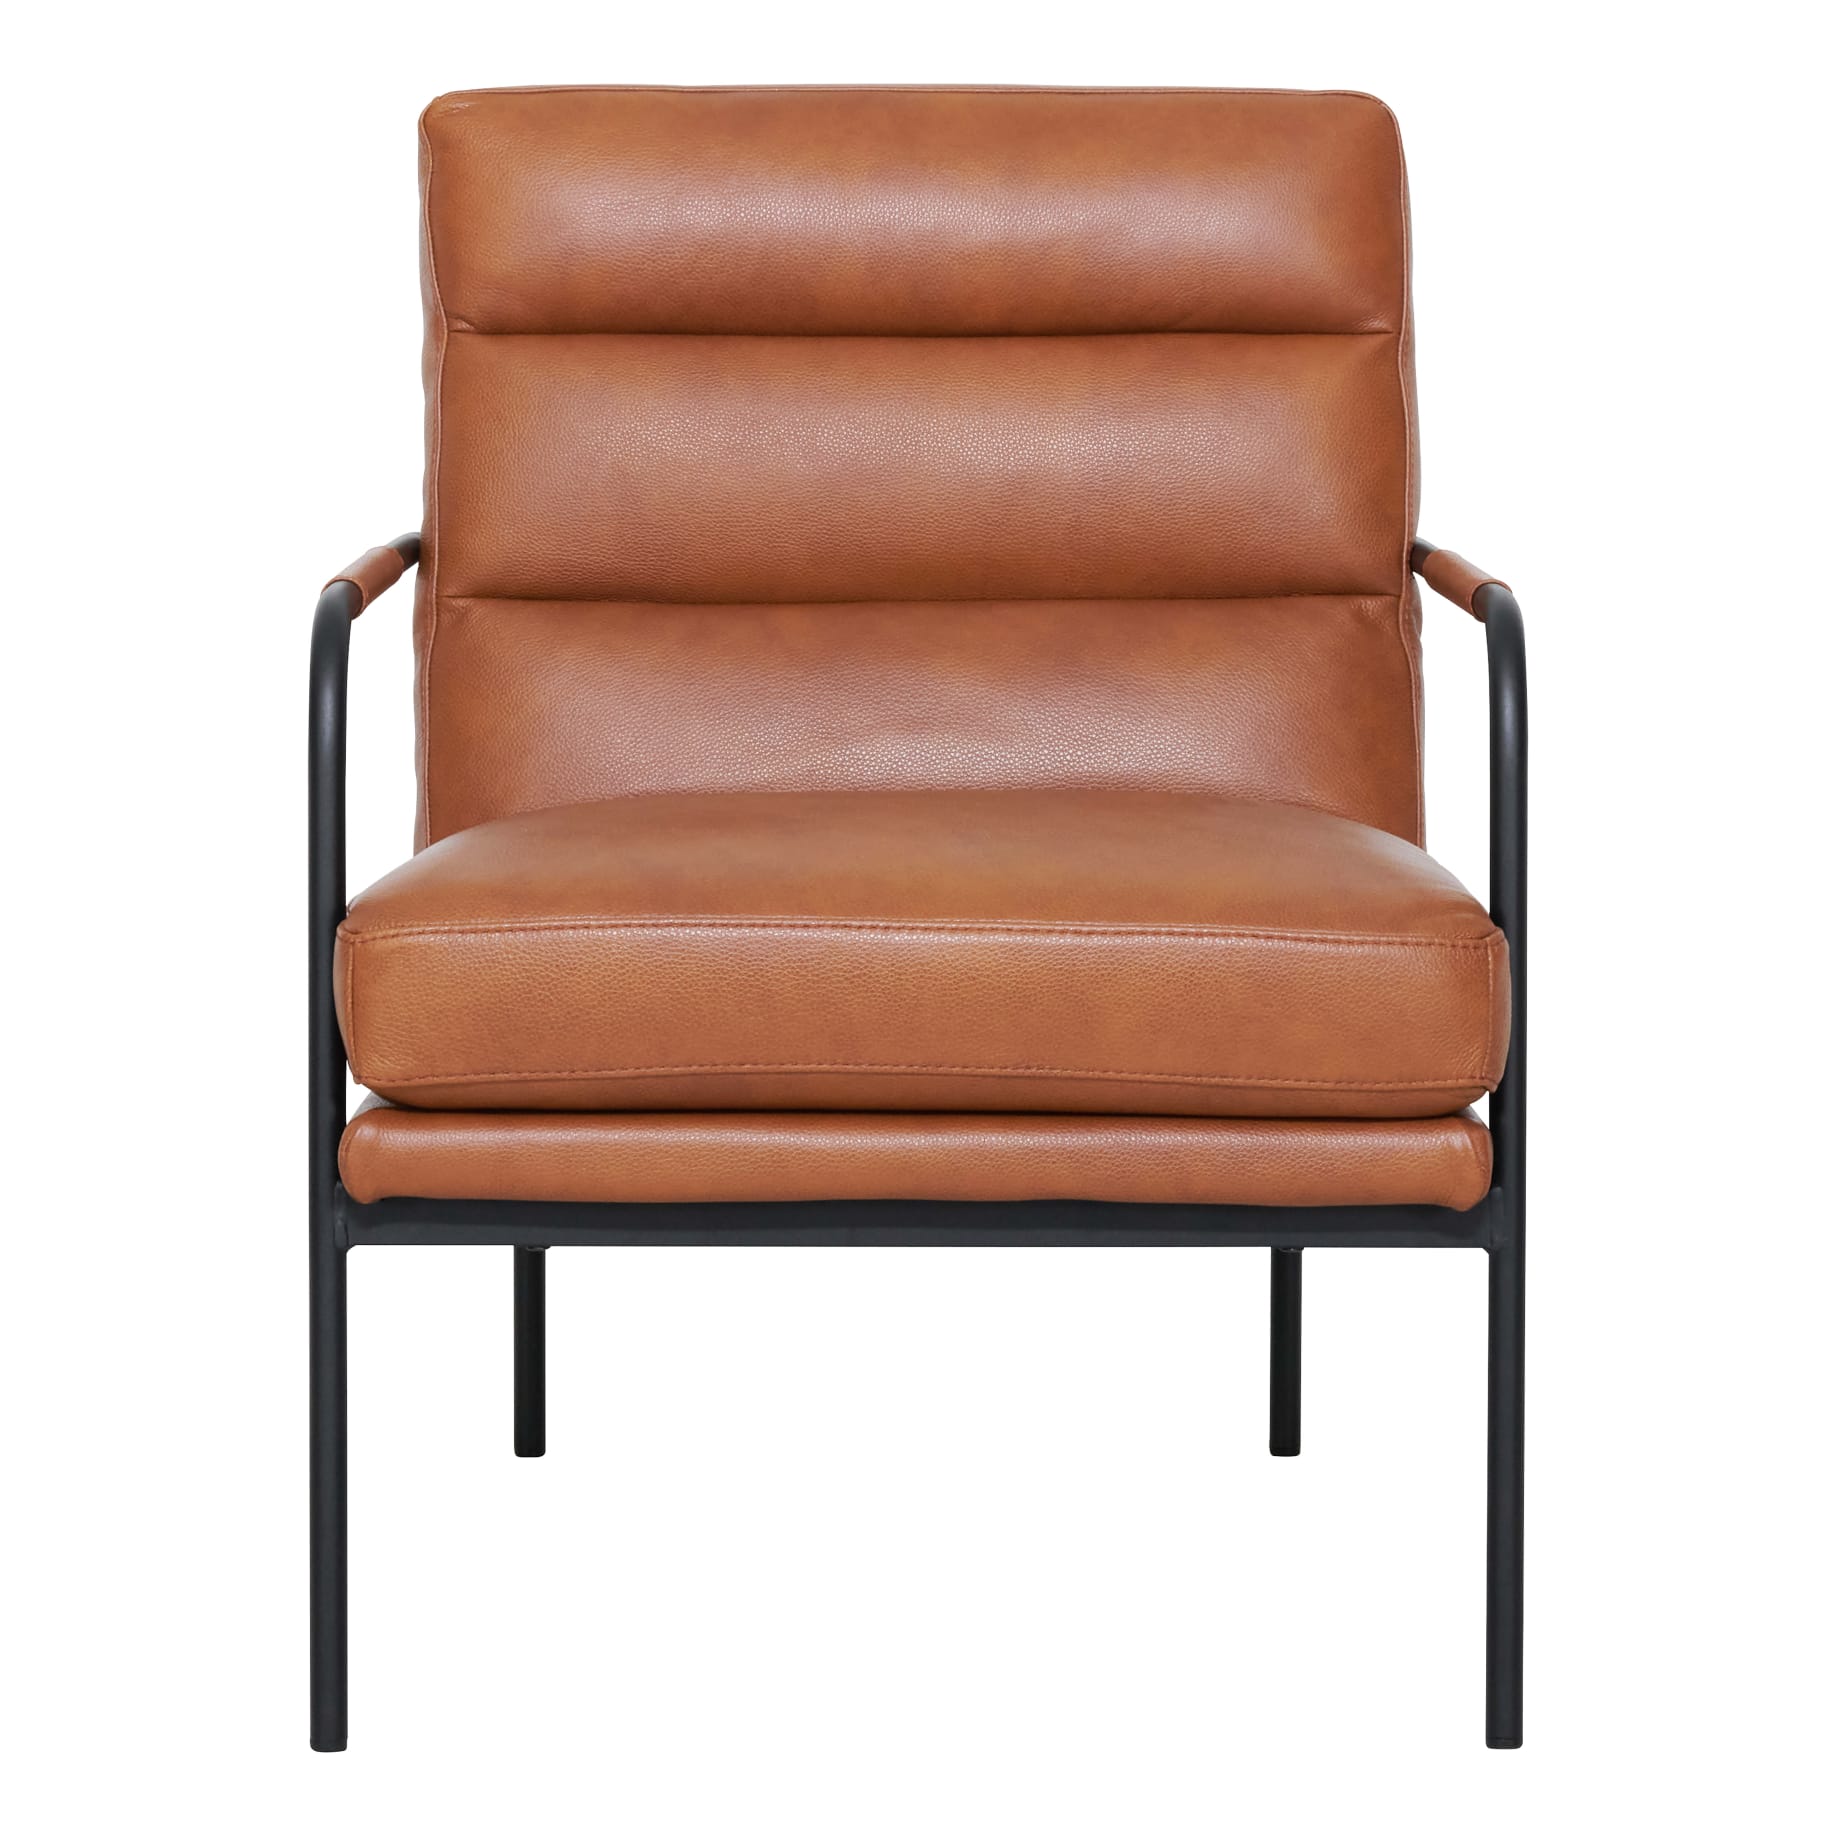 Hurley Designer Chair in Missouri Leather Brown